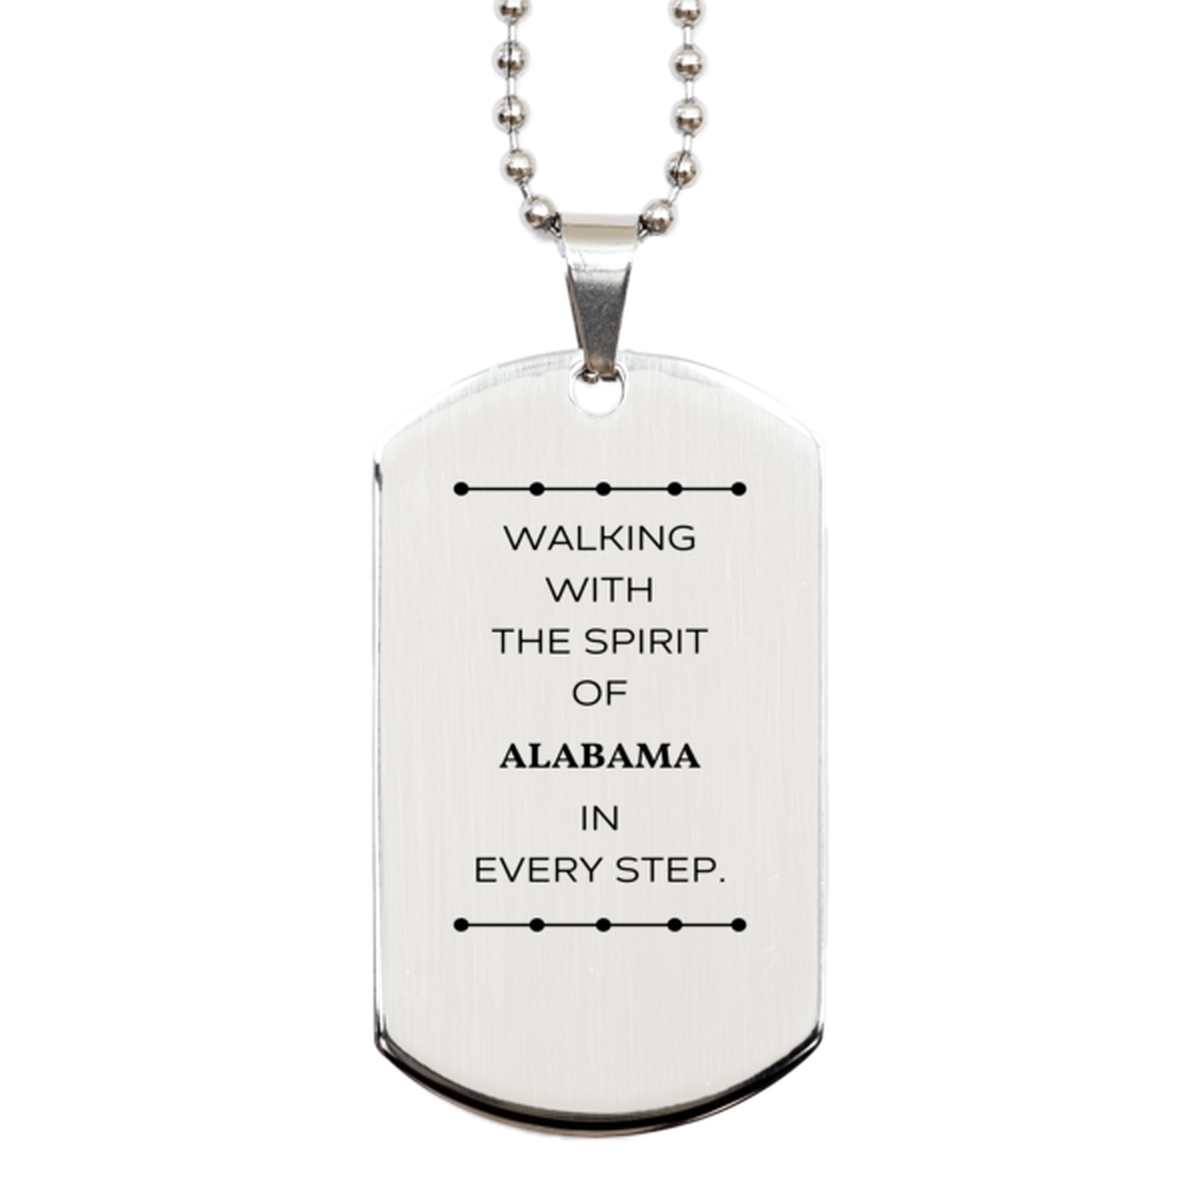 Alabama Gifts, Walking with the spirit, Love Alabama Birthday Christmas Silver Dog Tag For Alabama People, Men, Women, Friends